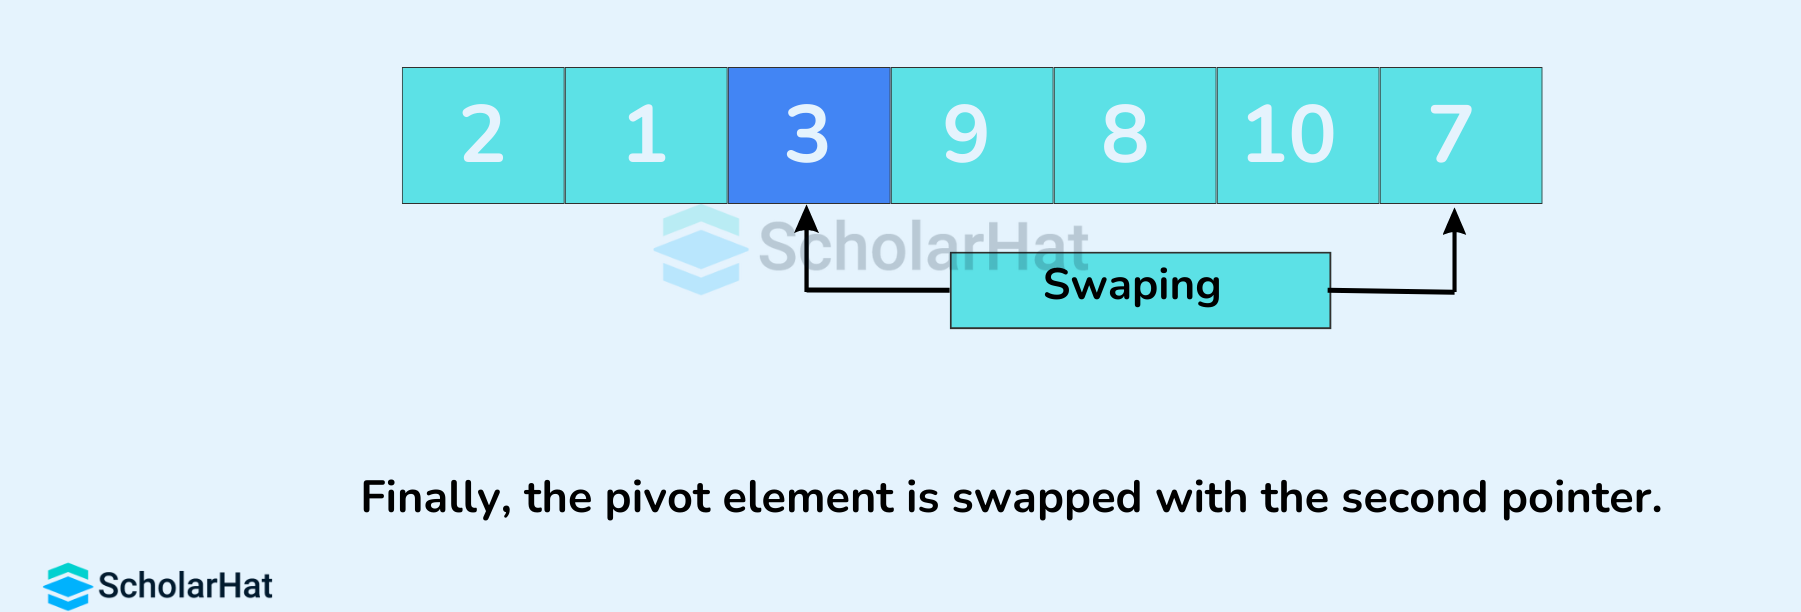 Finally, the pivot element is swapped with the second pointer.